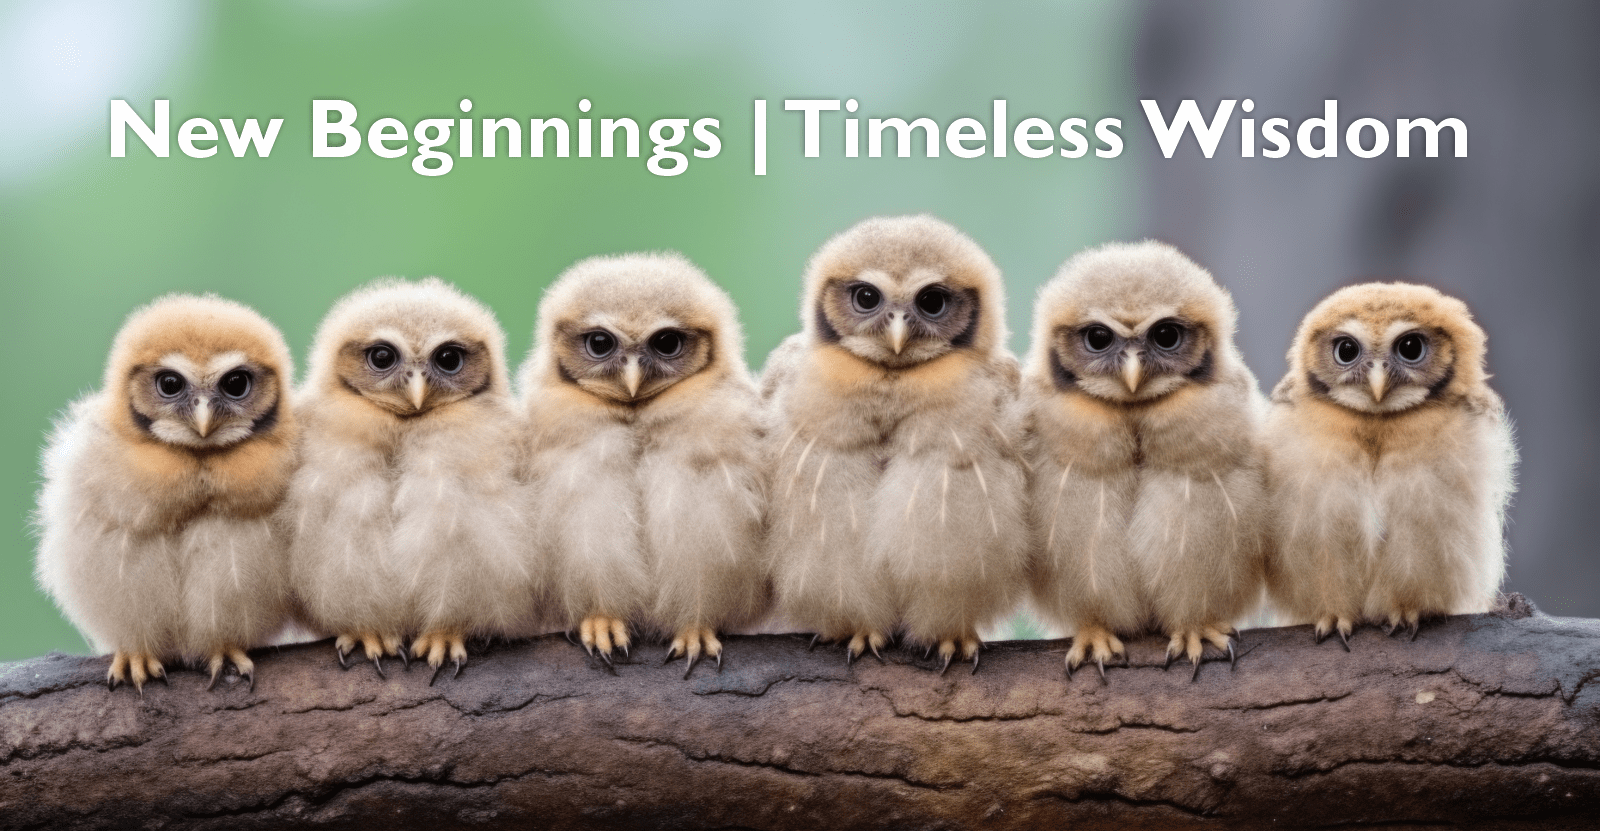 baby owls sitting on a branch with new beginnings timeless wisdom text